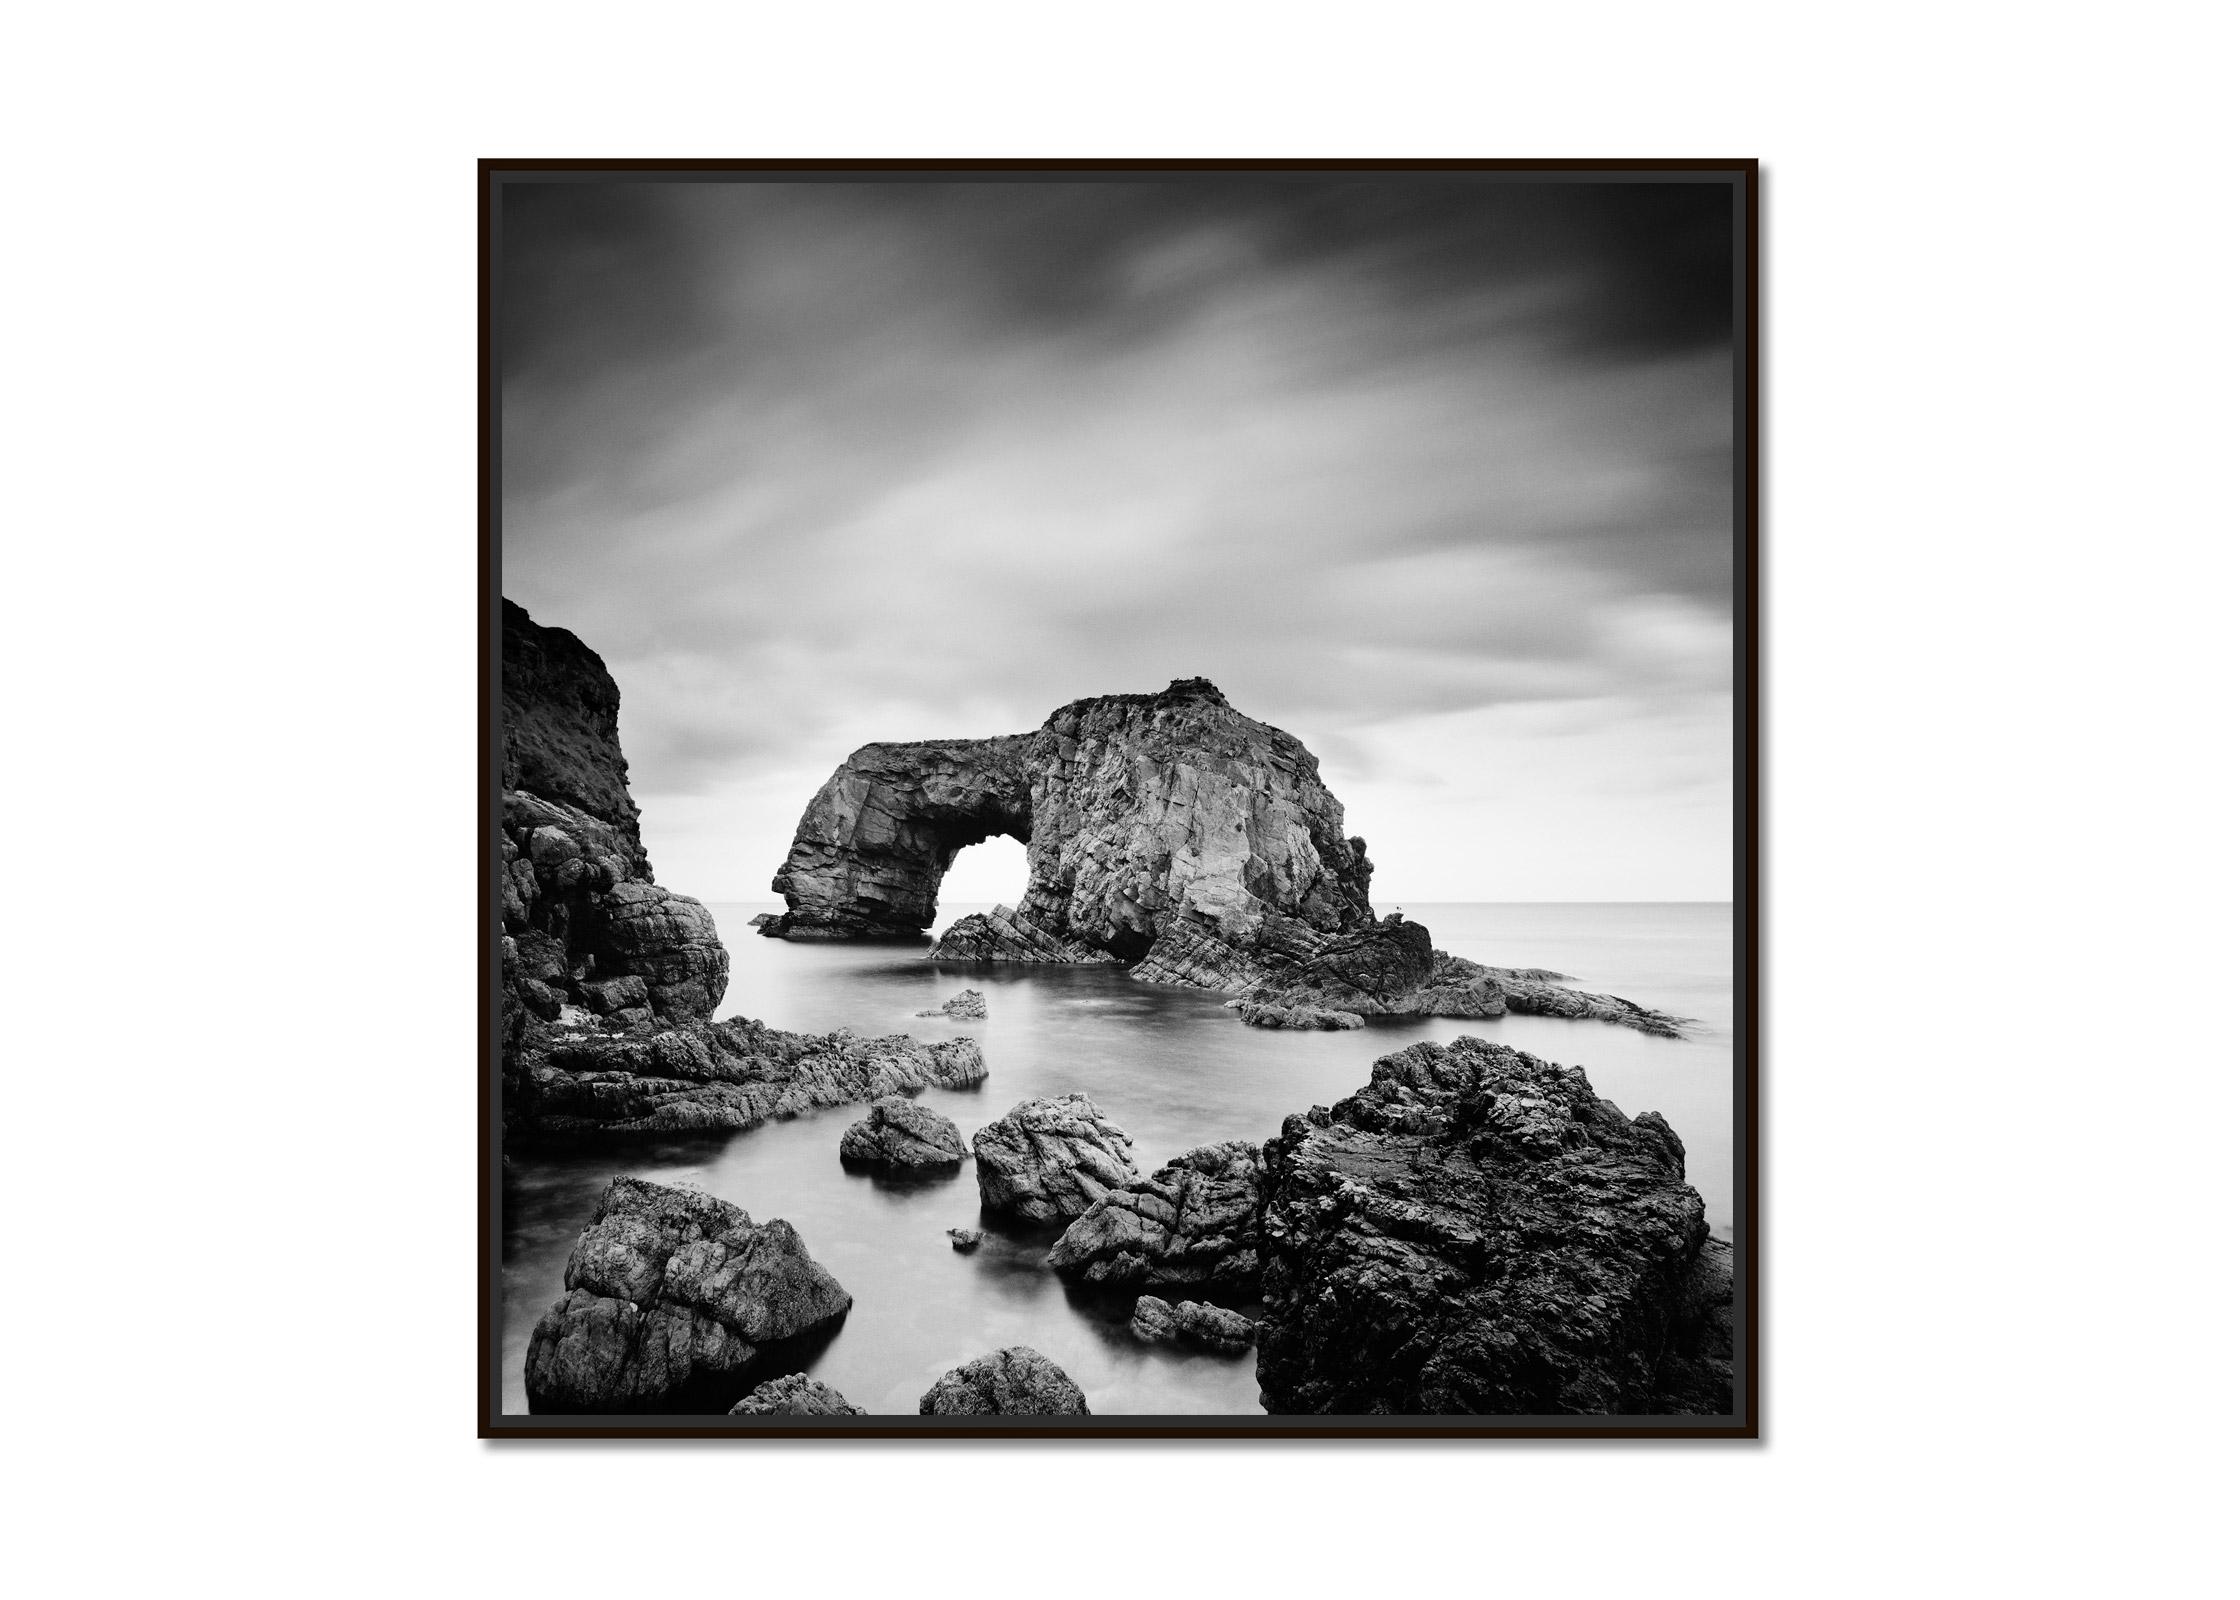 Great Pollet Sea Arch, Fanad, Ireland, black and white waterscape photography - Photograph by Gerald Berghammer